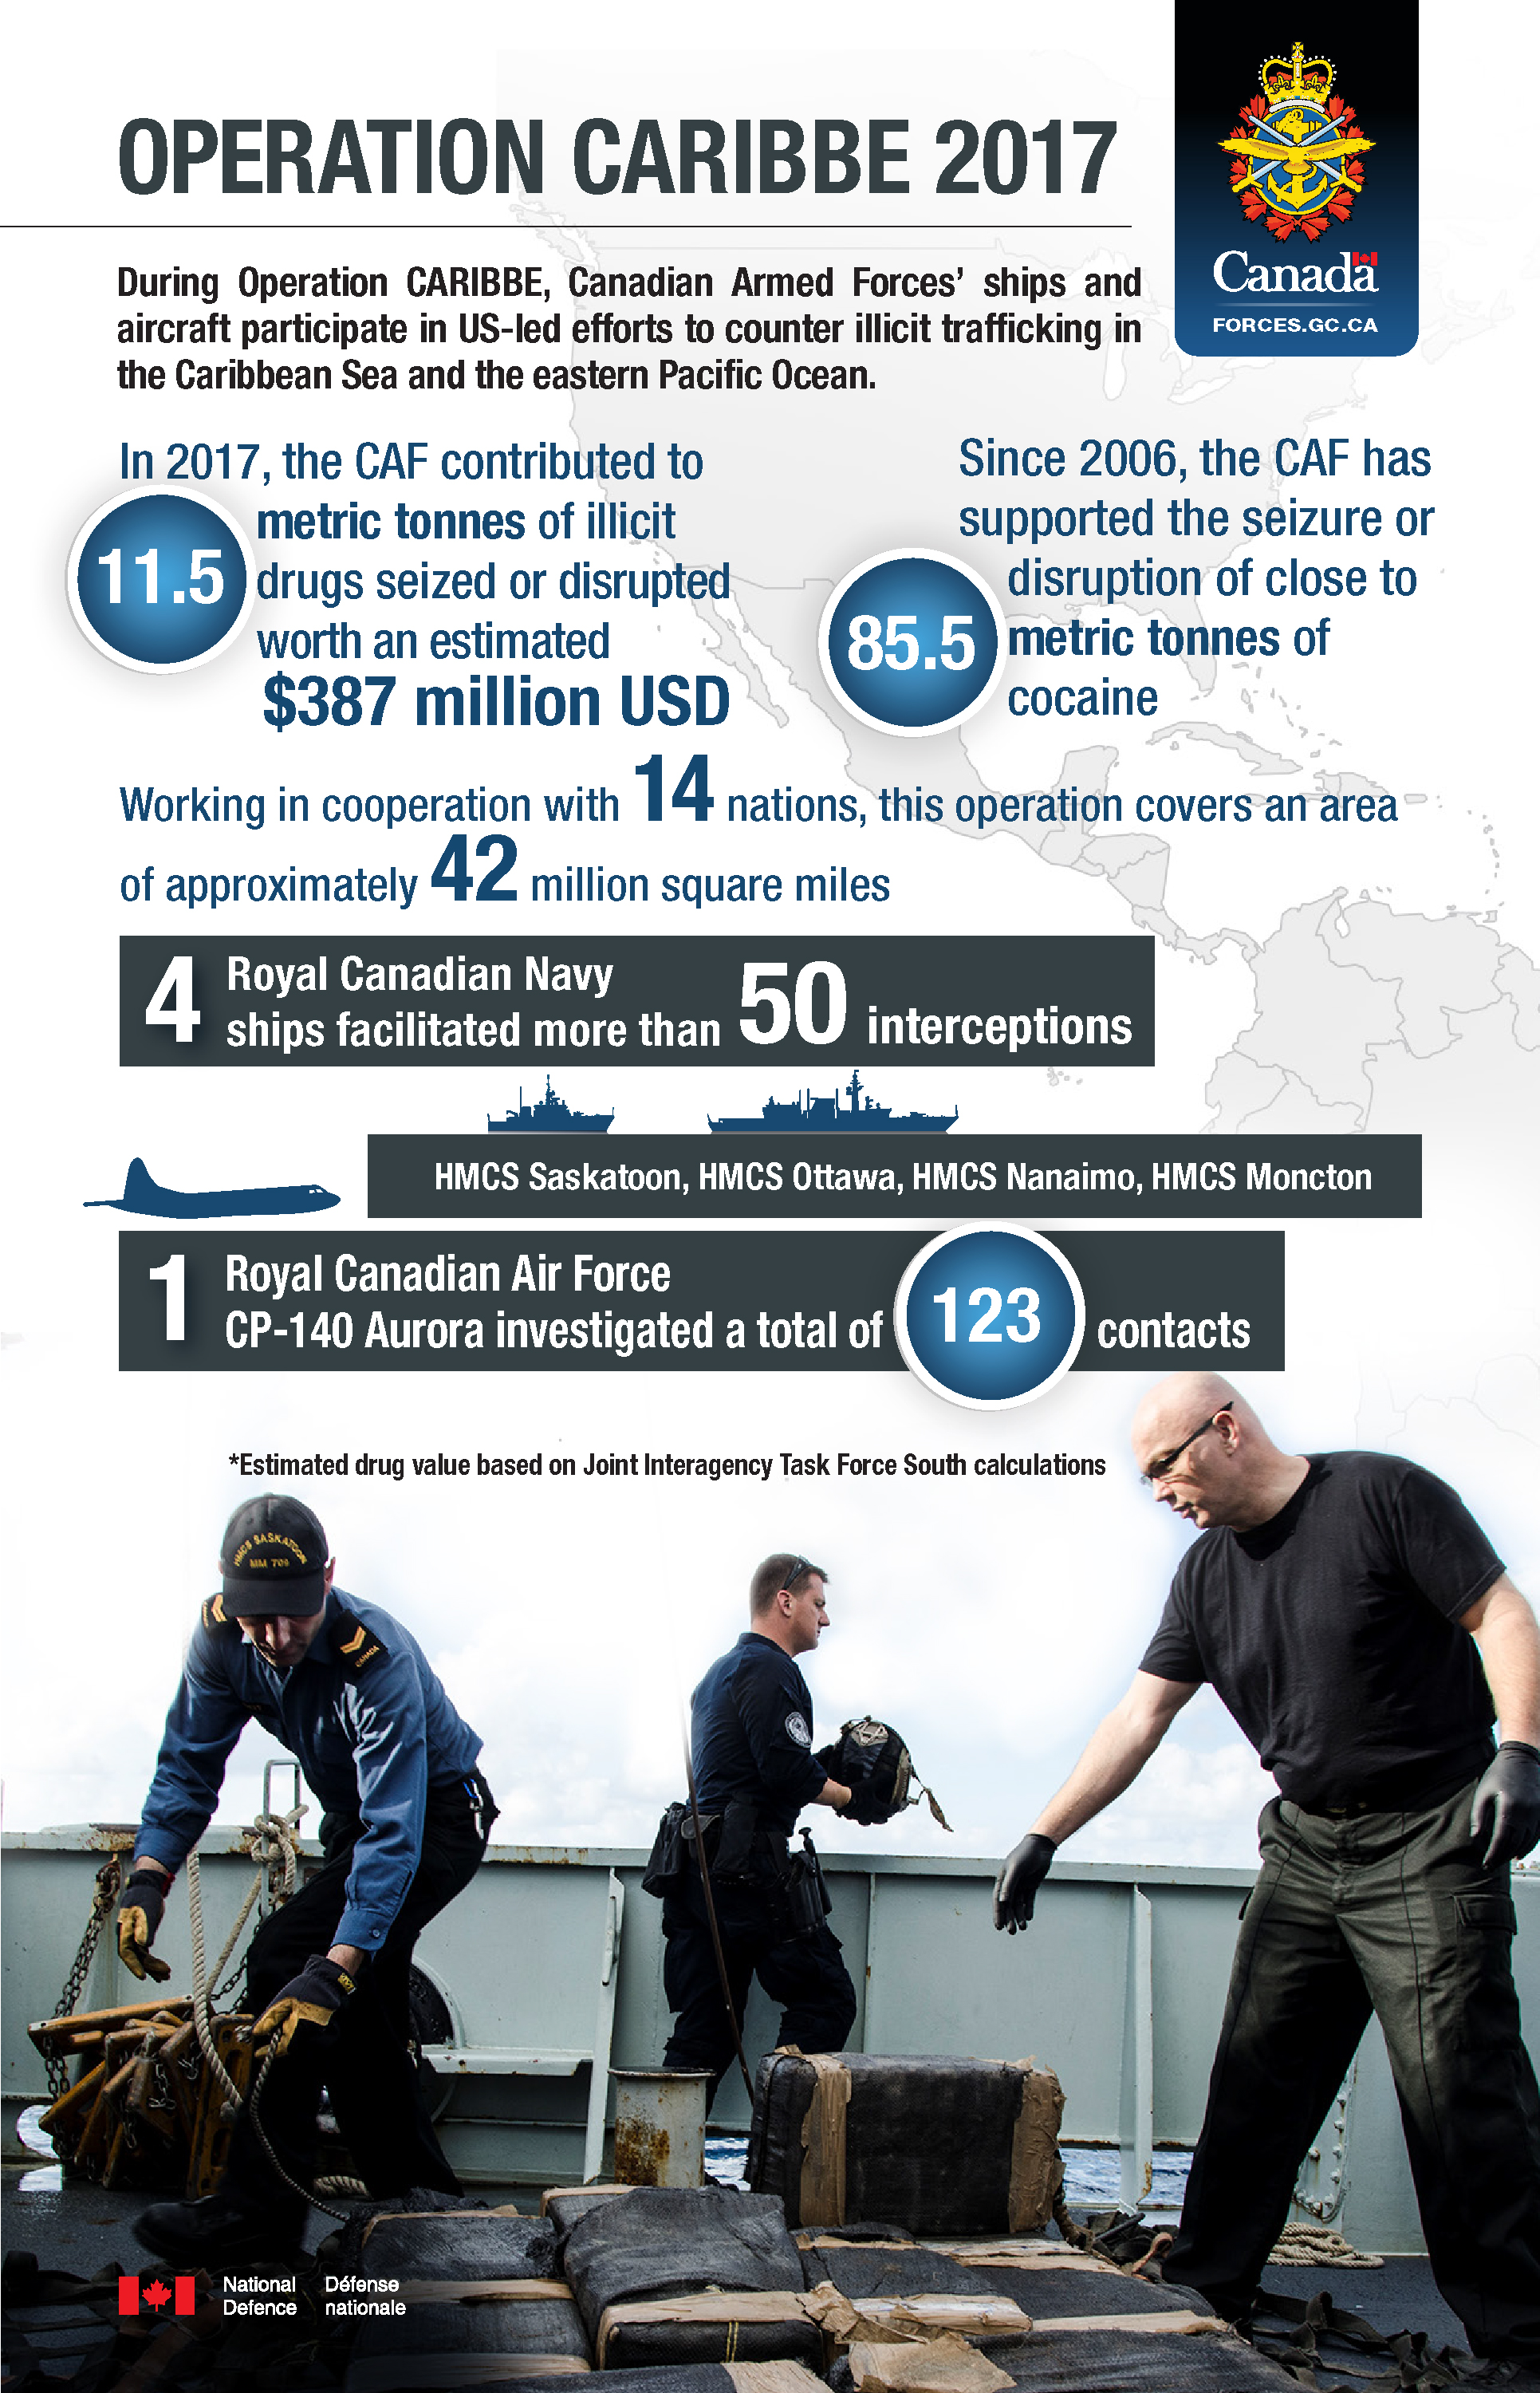 In 2017, the CAF contributed to 11.5 metric tonnes of illicit drugs seized or disrupted worth an estimated $387 million USD.